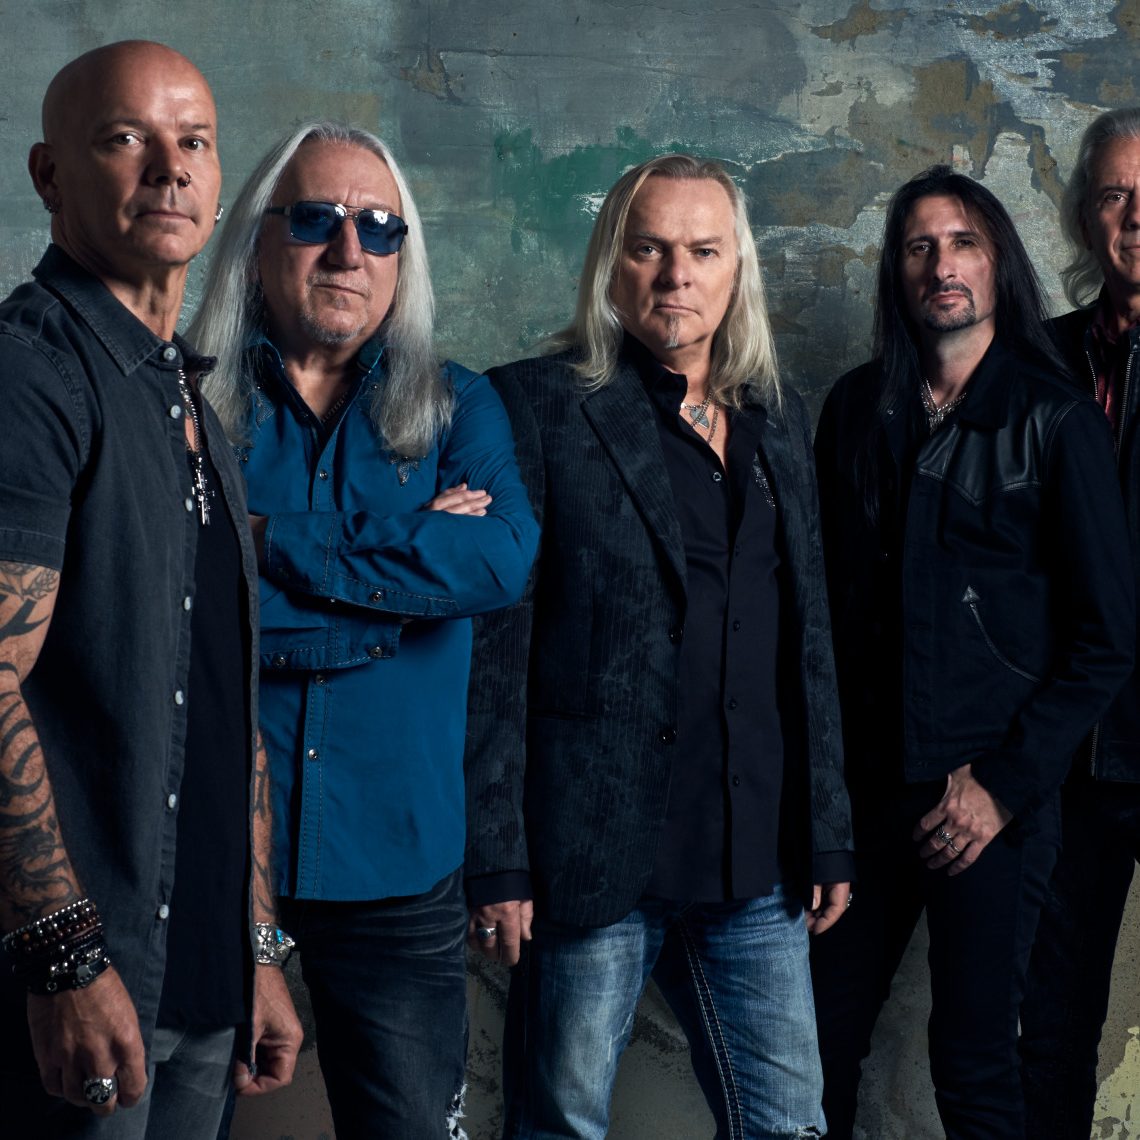 Uriah Heep To Release “Living The Dream” September 14th via Frontiers Music Srl; First Video and Single Streaming Now